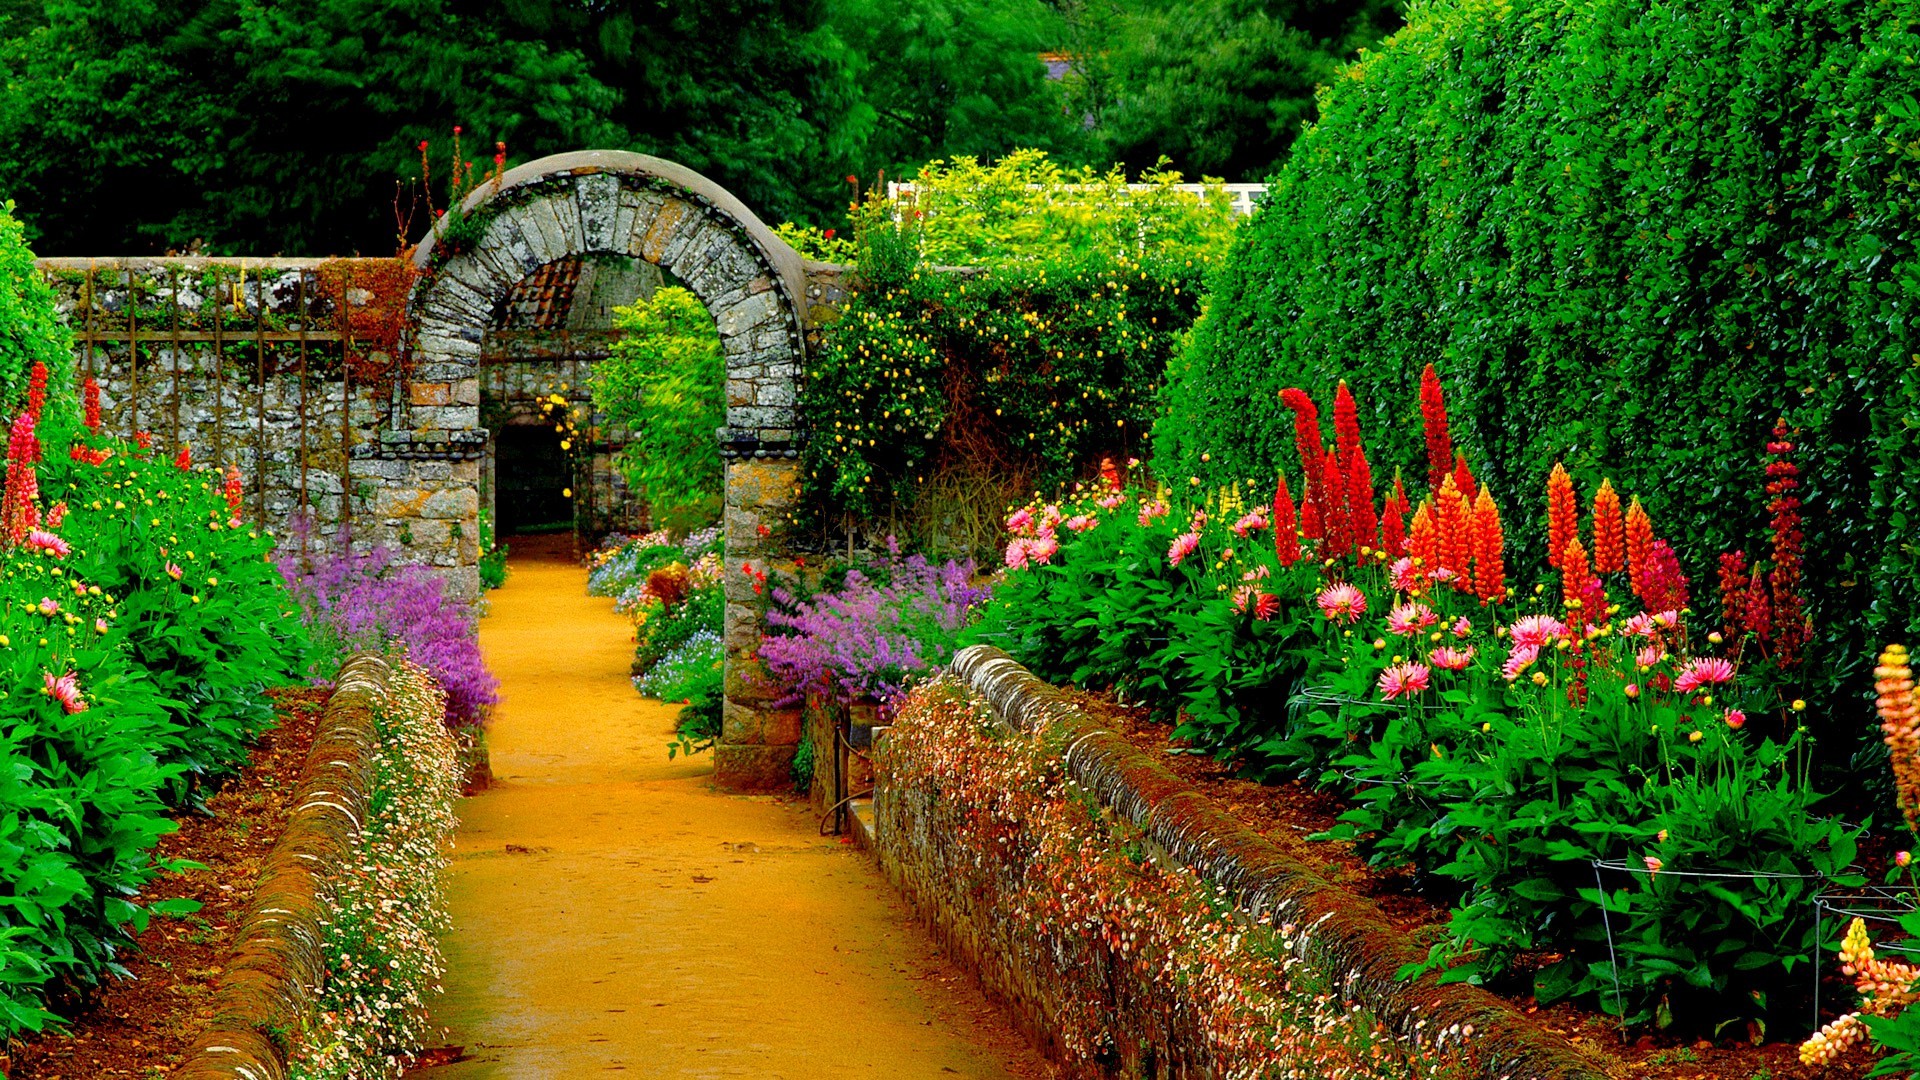 1920x1080 Download Country Garden wallpaper in Nature wallpapers with all .